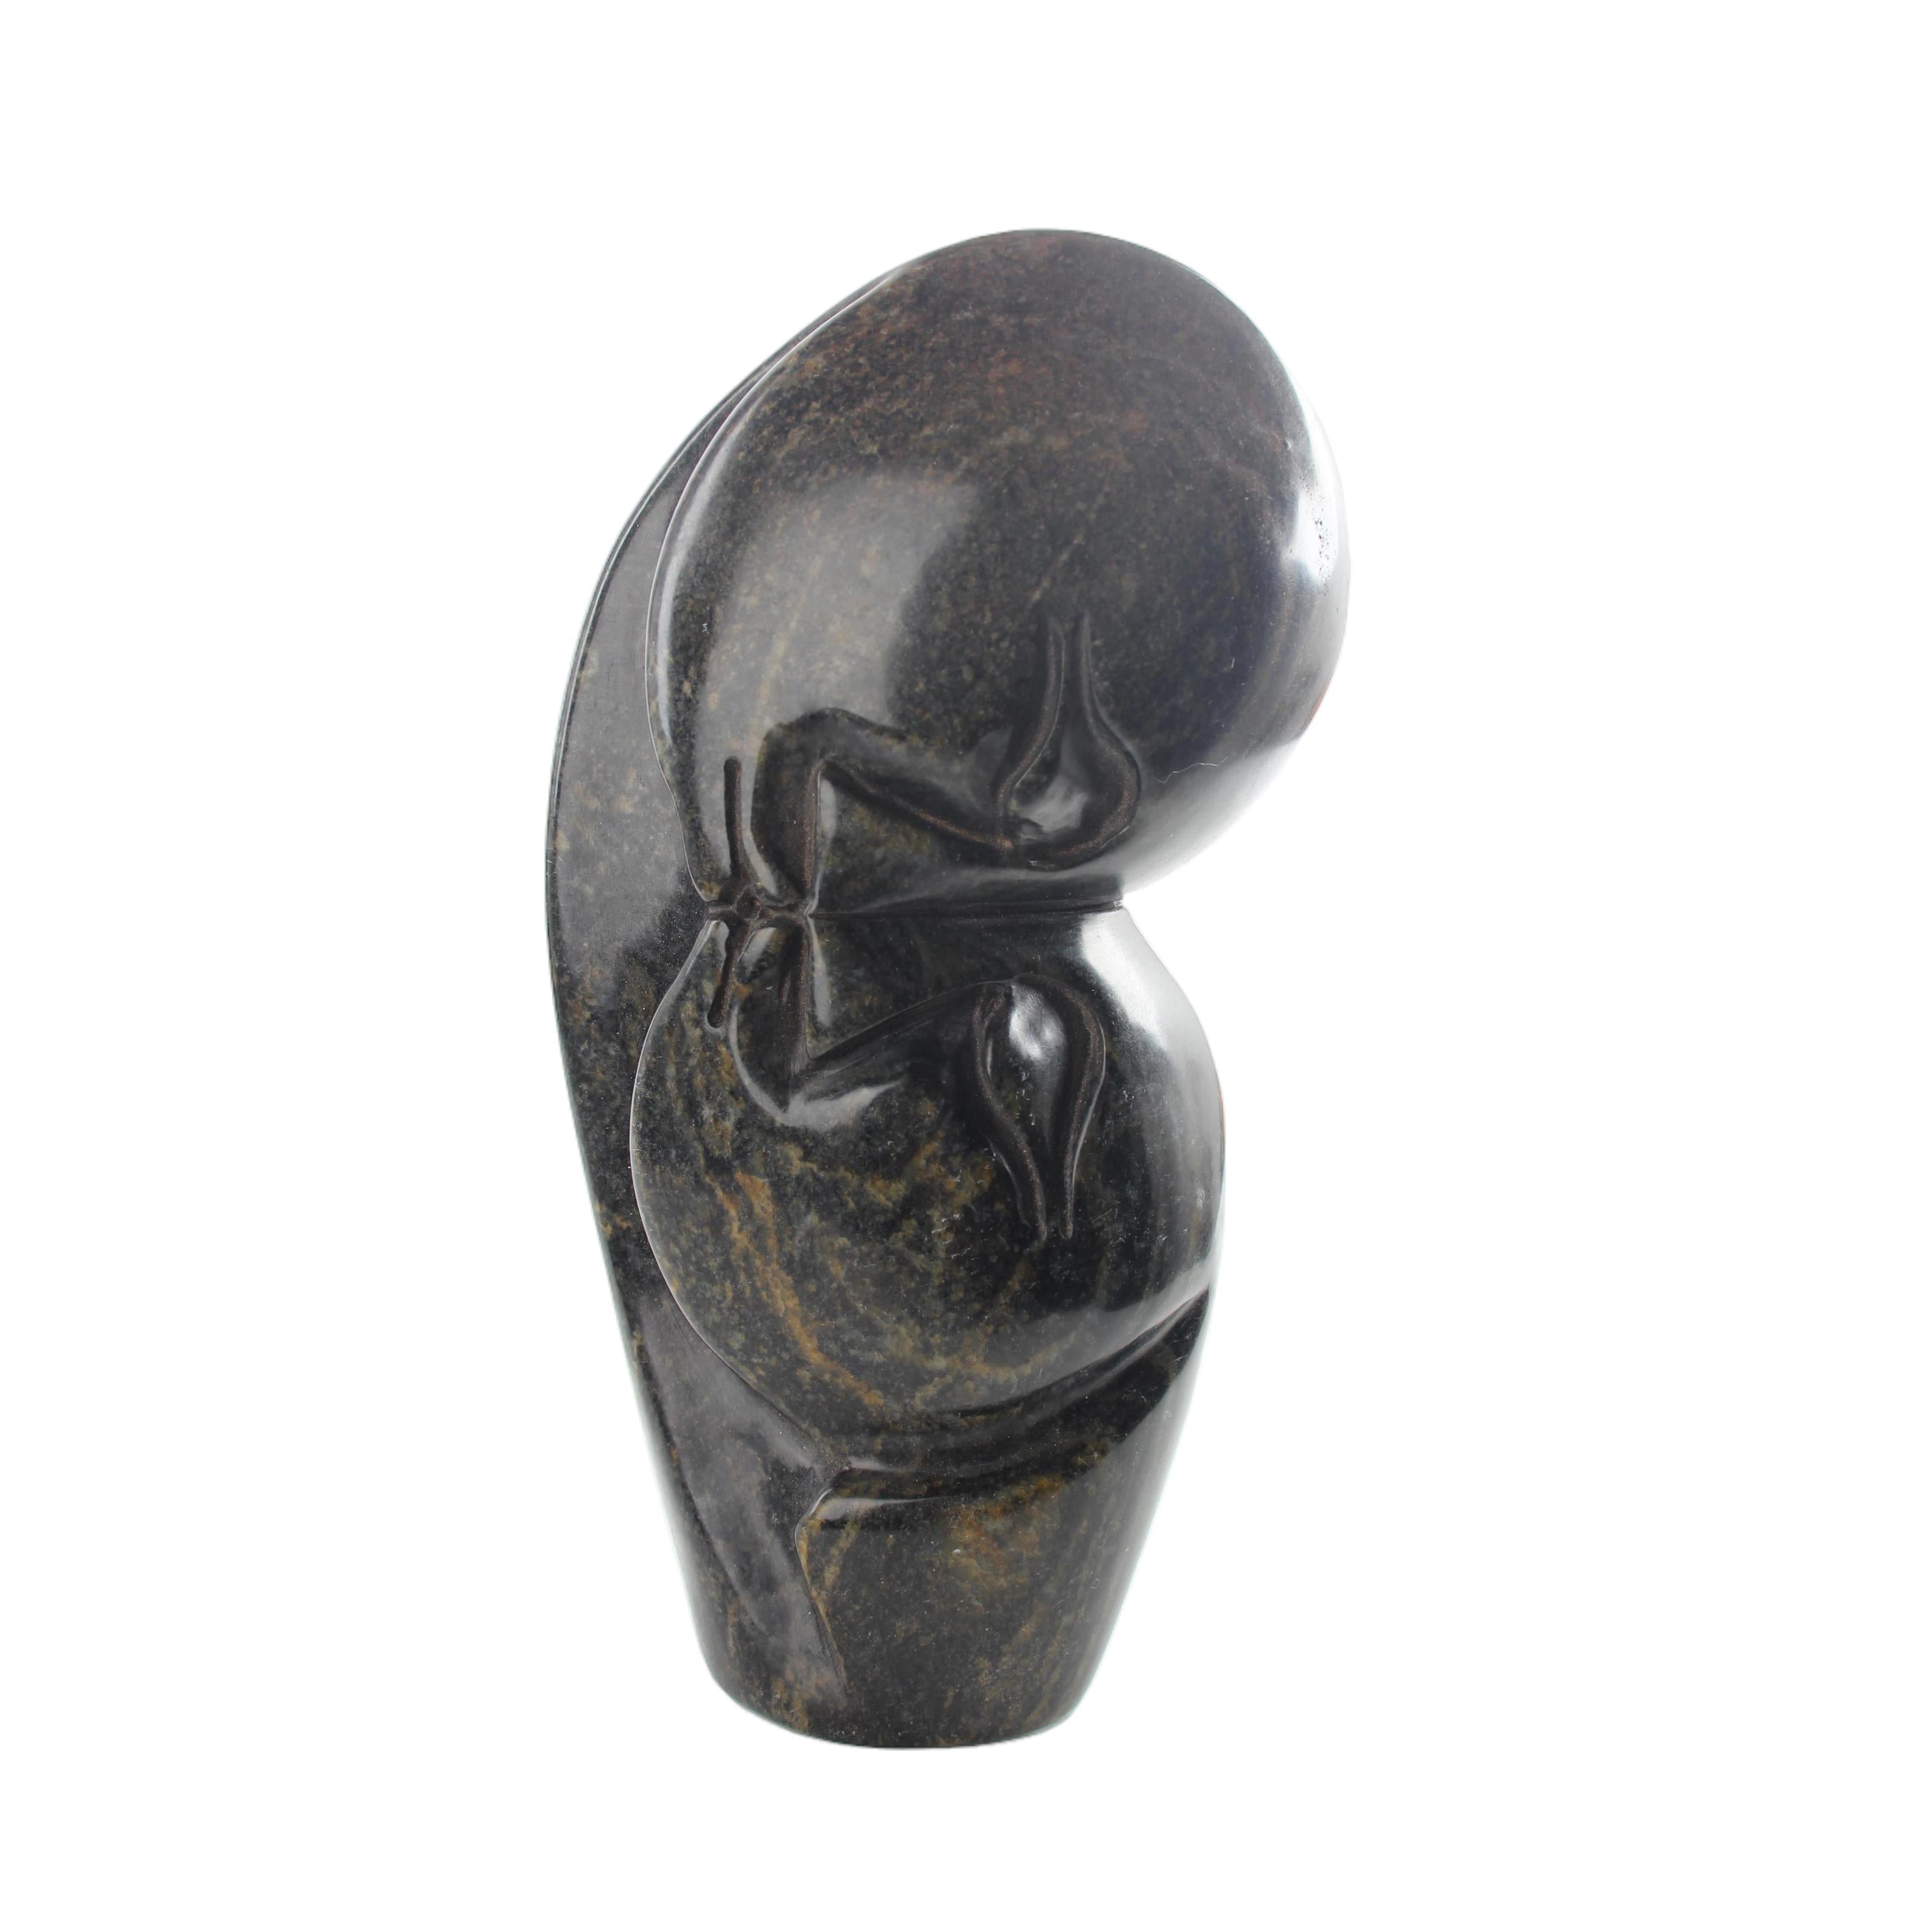 Shona Tribe Serpentine Stone Lovers ~9.8" Tall - Lovers